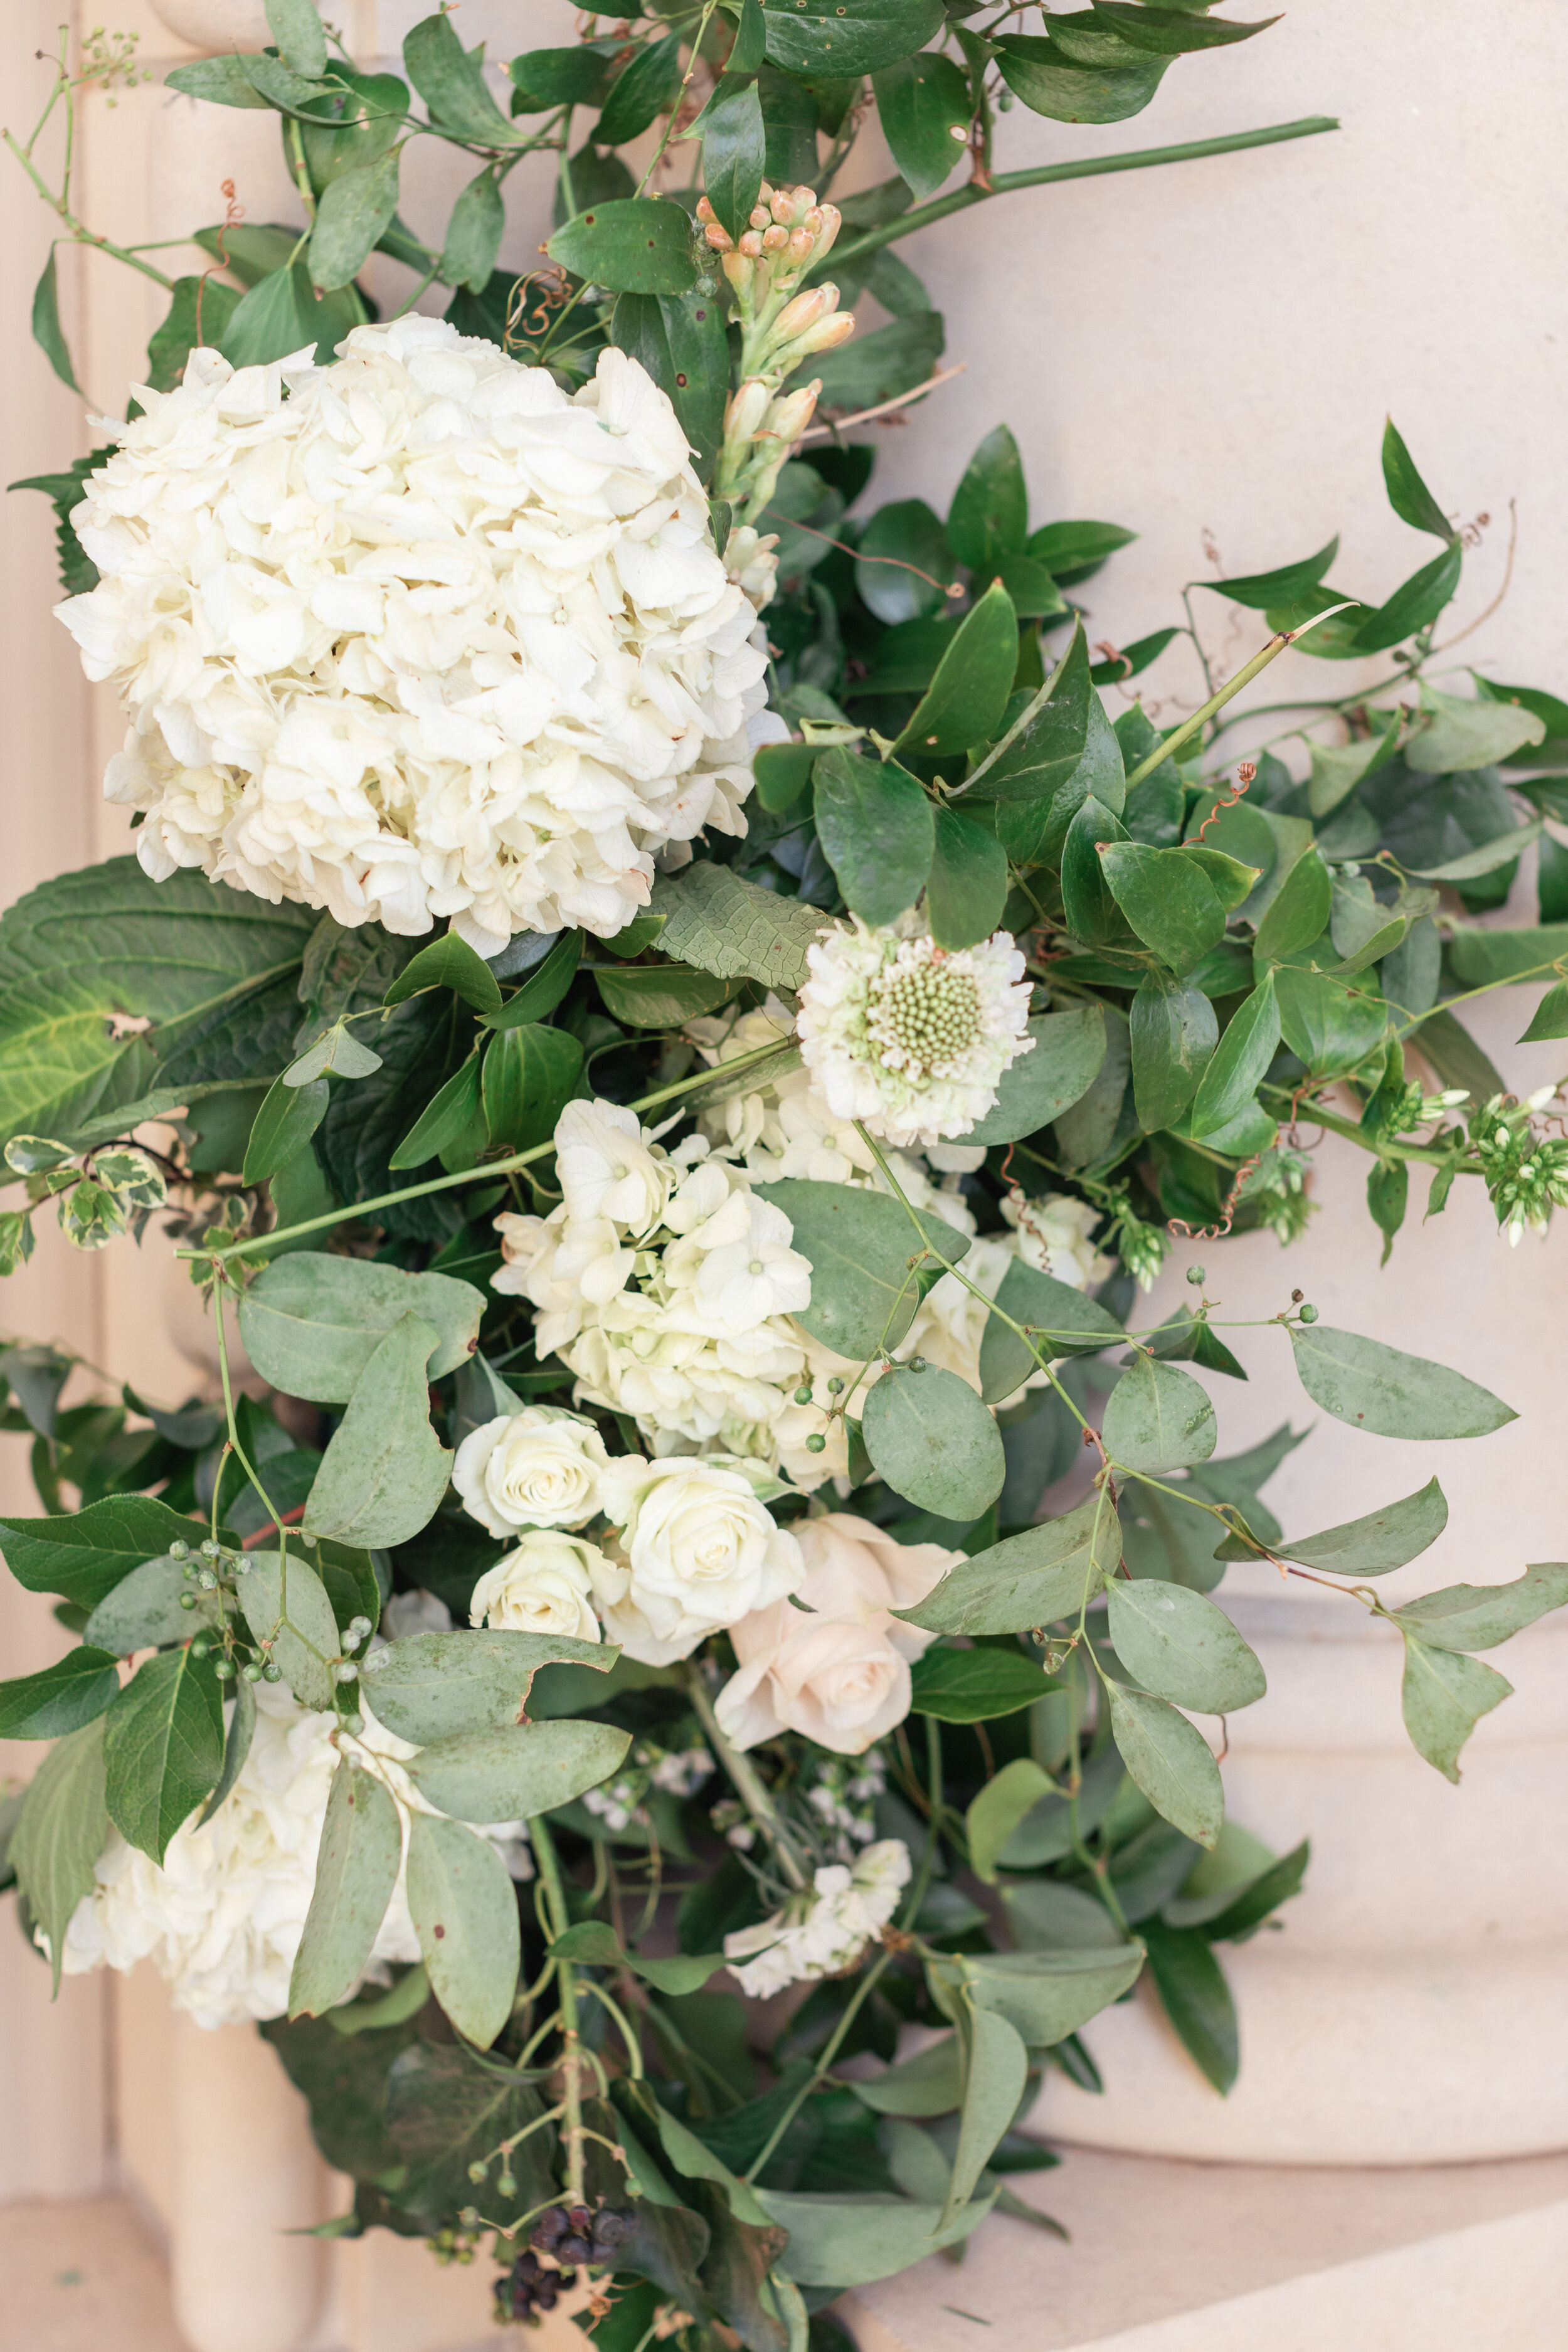 White hydrangea floral wedding arrangement with green leaves and white spray roses